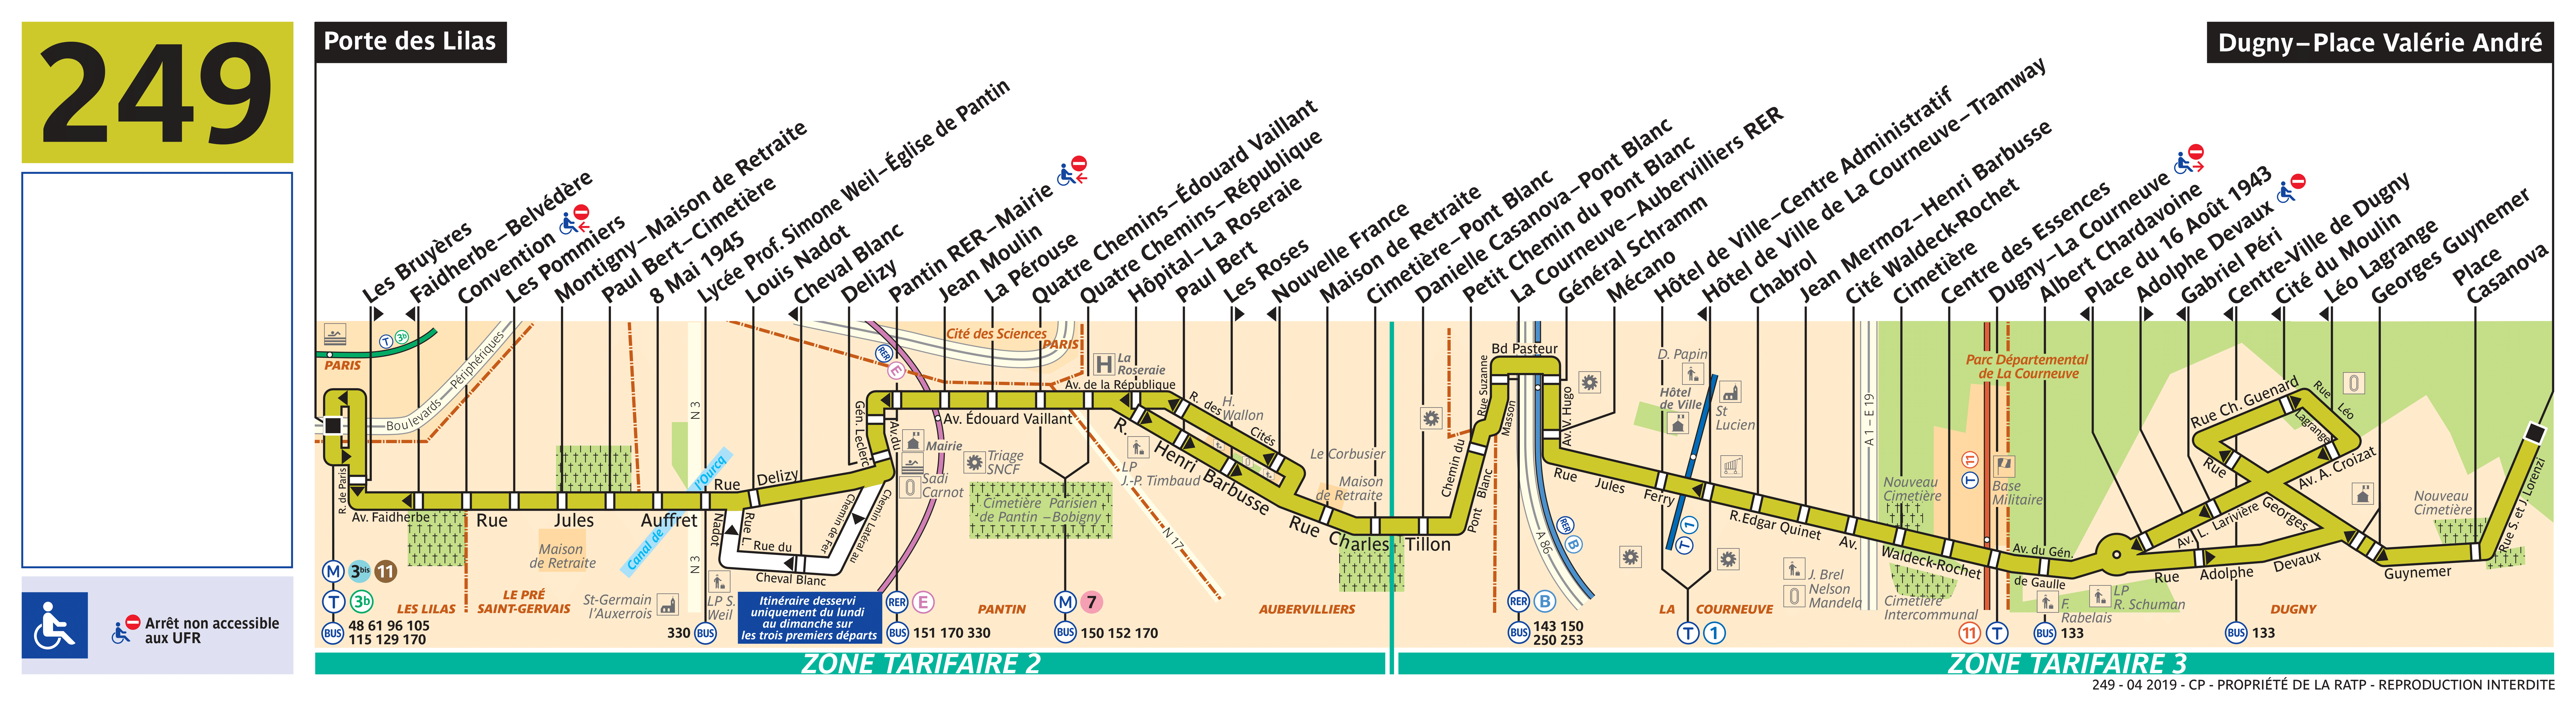 249 Bus Route Map